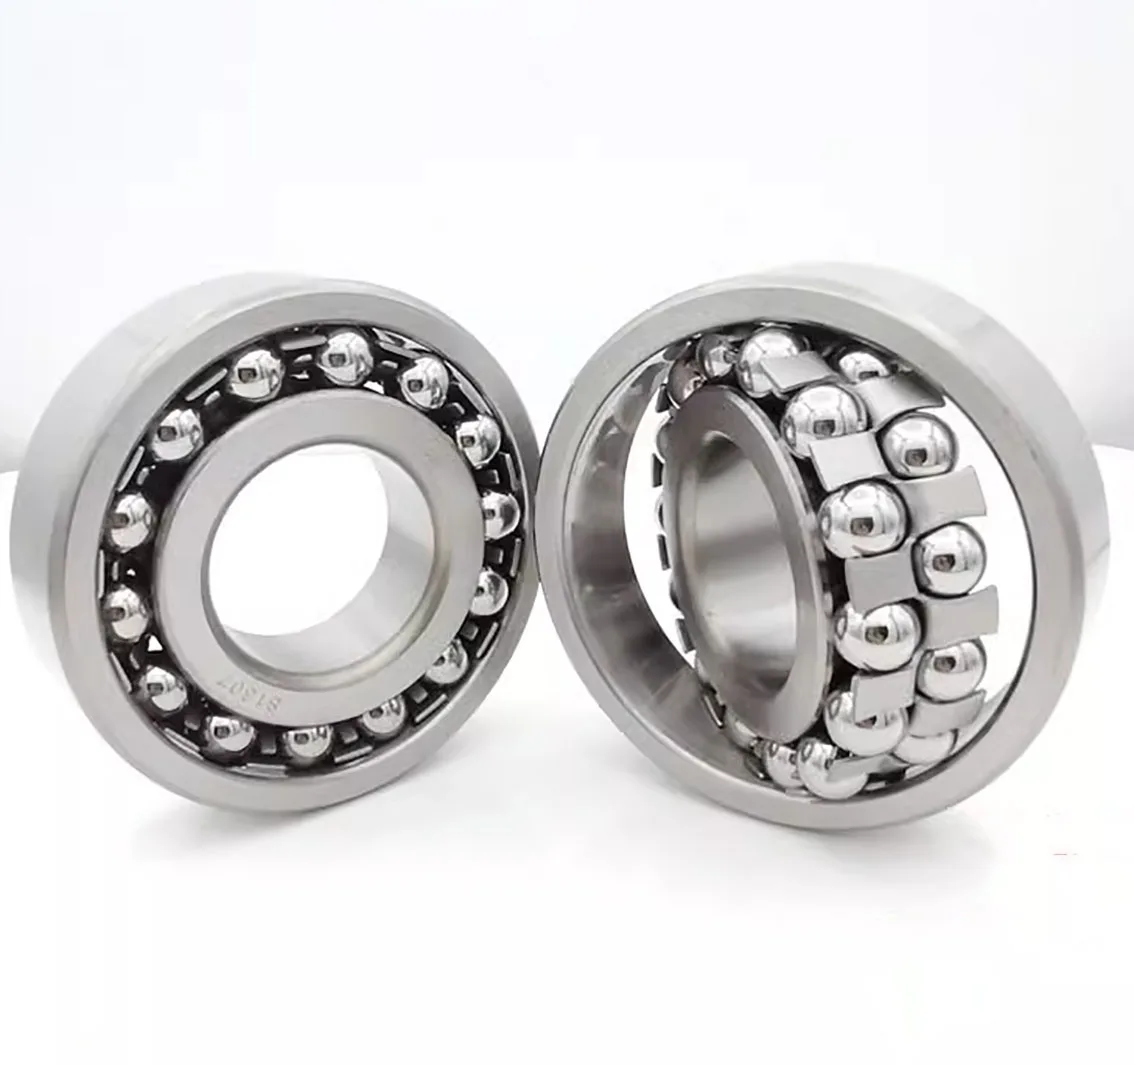 

1Pcs 304/440 Stainless Steel Double Row Self-aligning Ball Bearing S1200 1201 1202 1203 1204 1205 1206 1207 1208 1209 1210